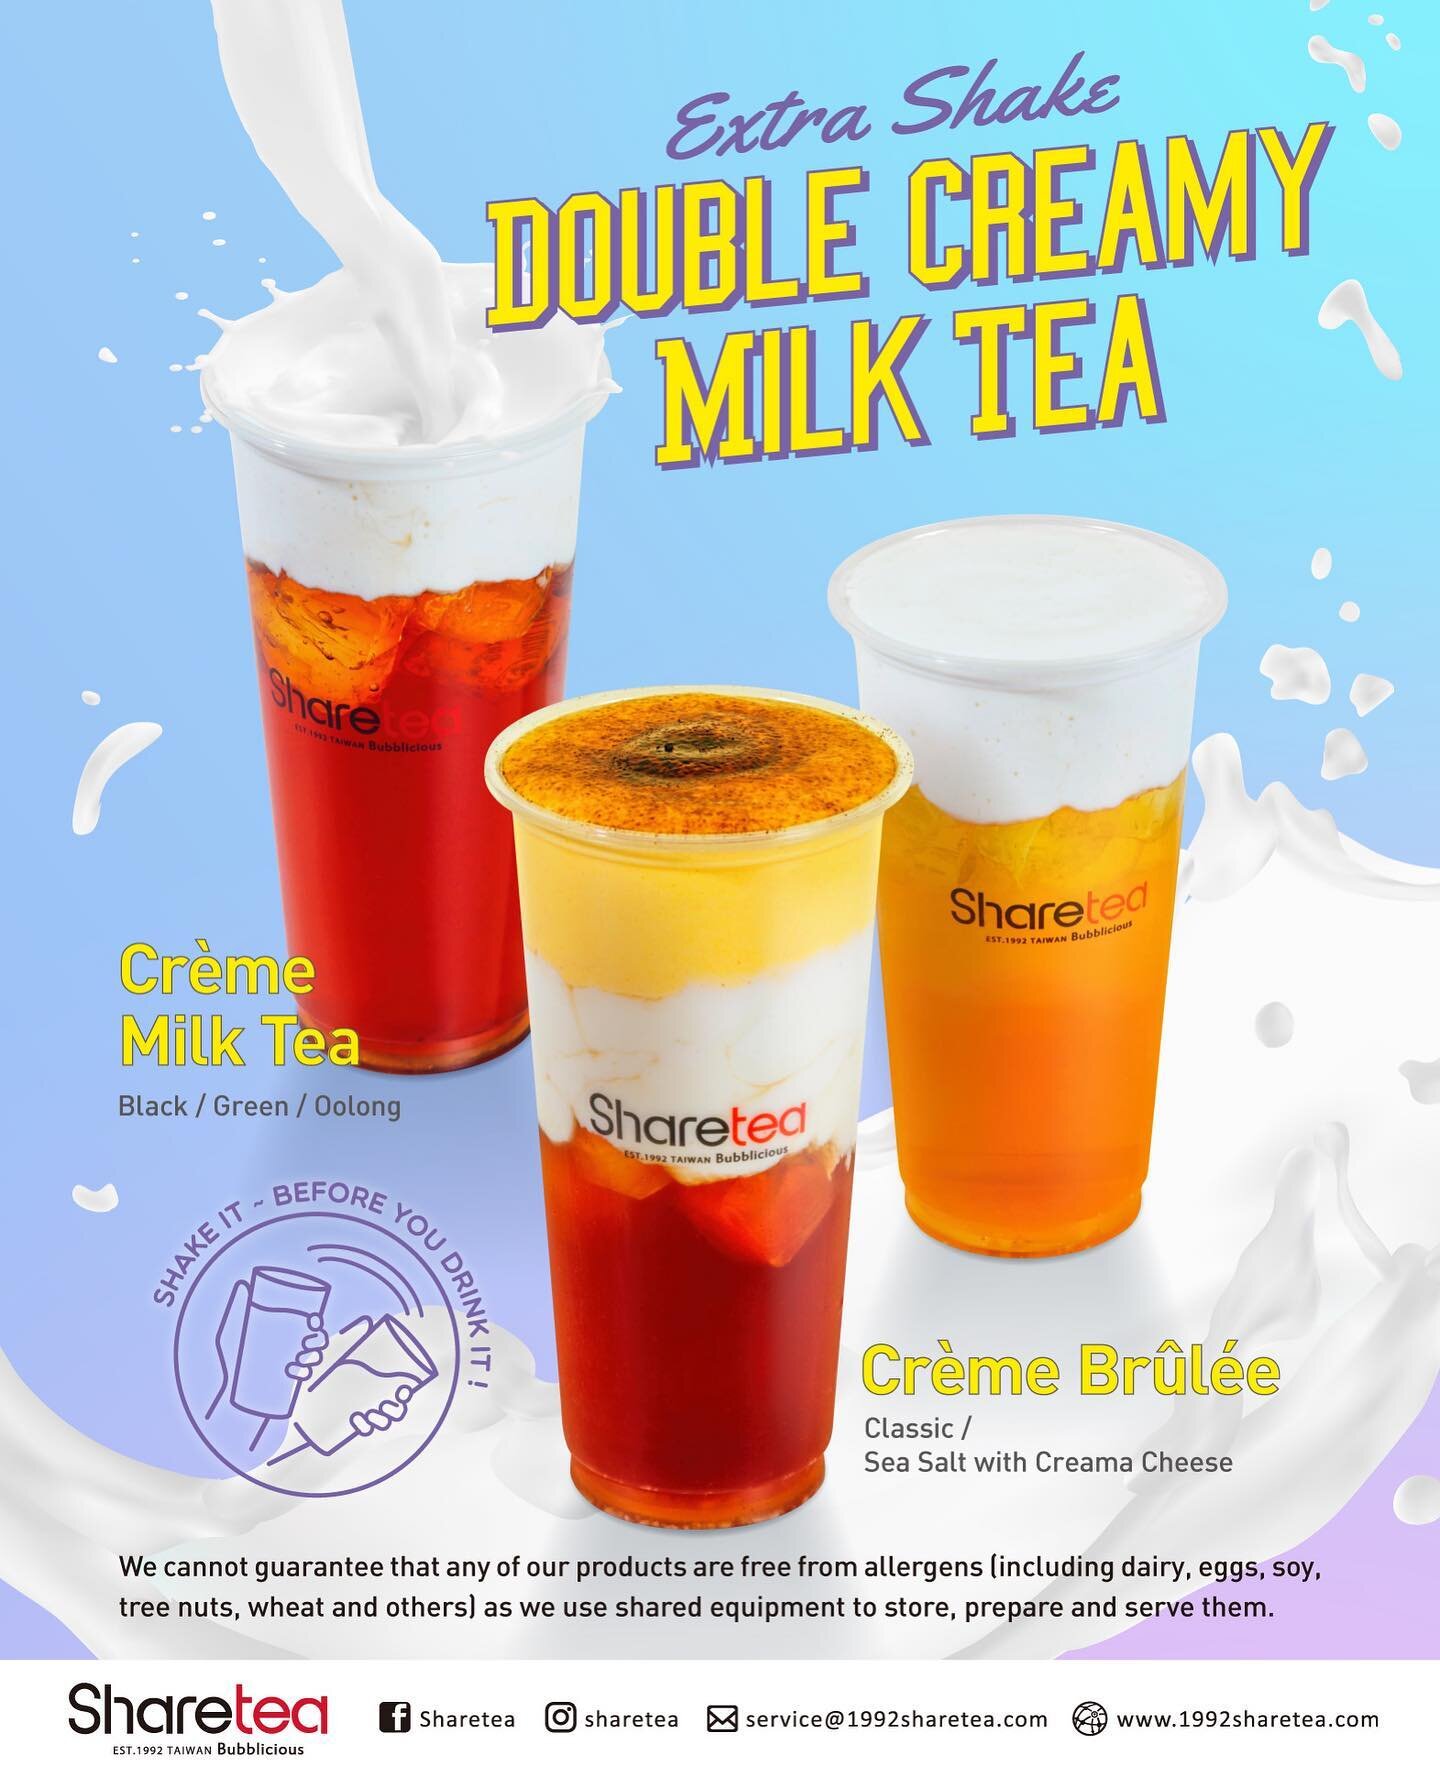 We&rsquo;ve got a new sweet treat for you to try 🍮🔥! 

Introducing our new double creamy milk tea series&hellip;
⭐️ Cr&egrave;me Br&ucirc;l&eacute;e: A delicious black tea base with our house-made double creamy milk, house-made caramel cream and a 